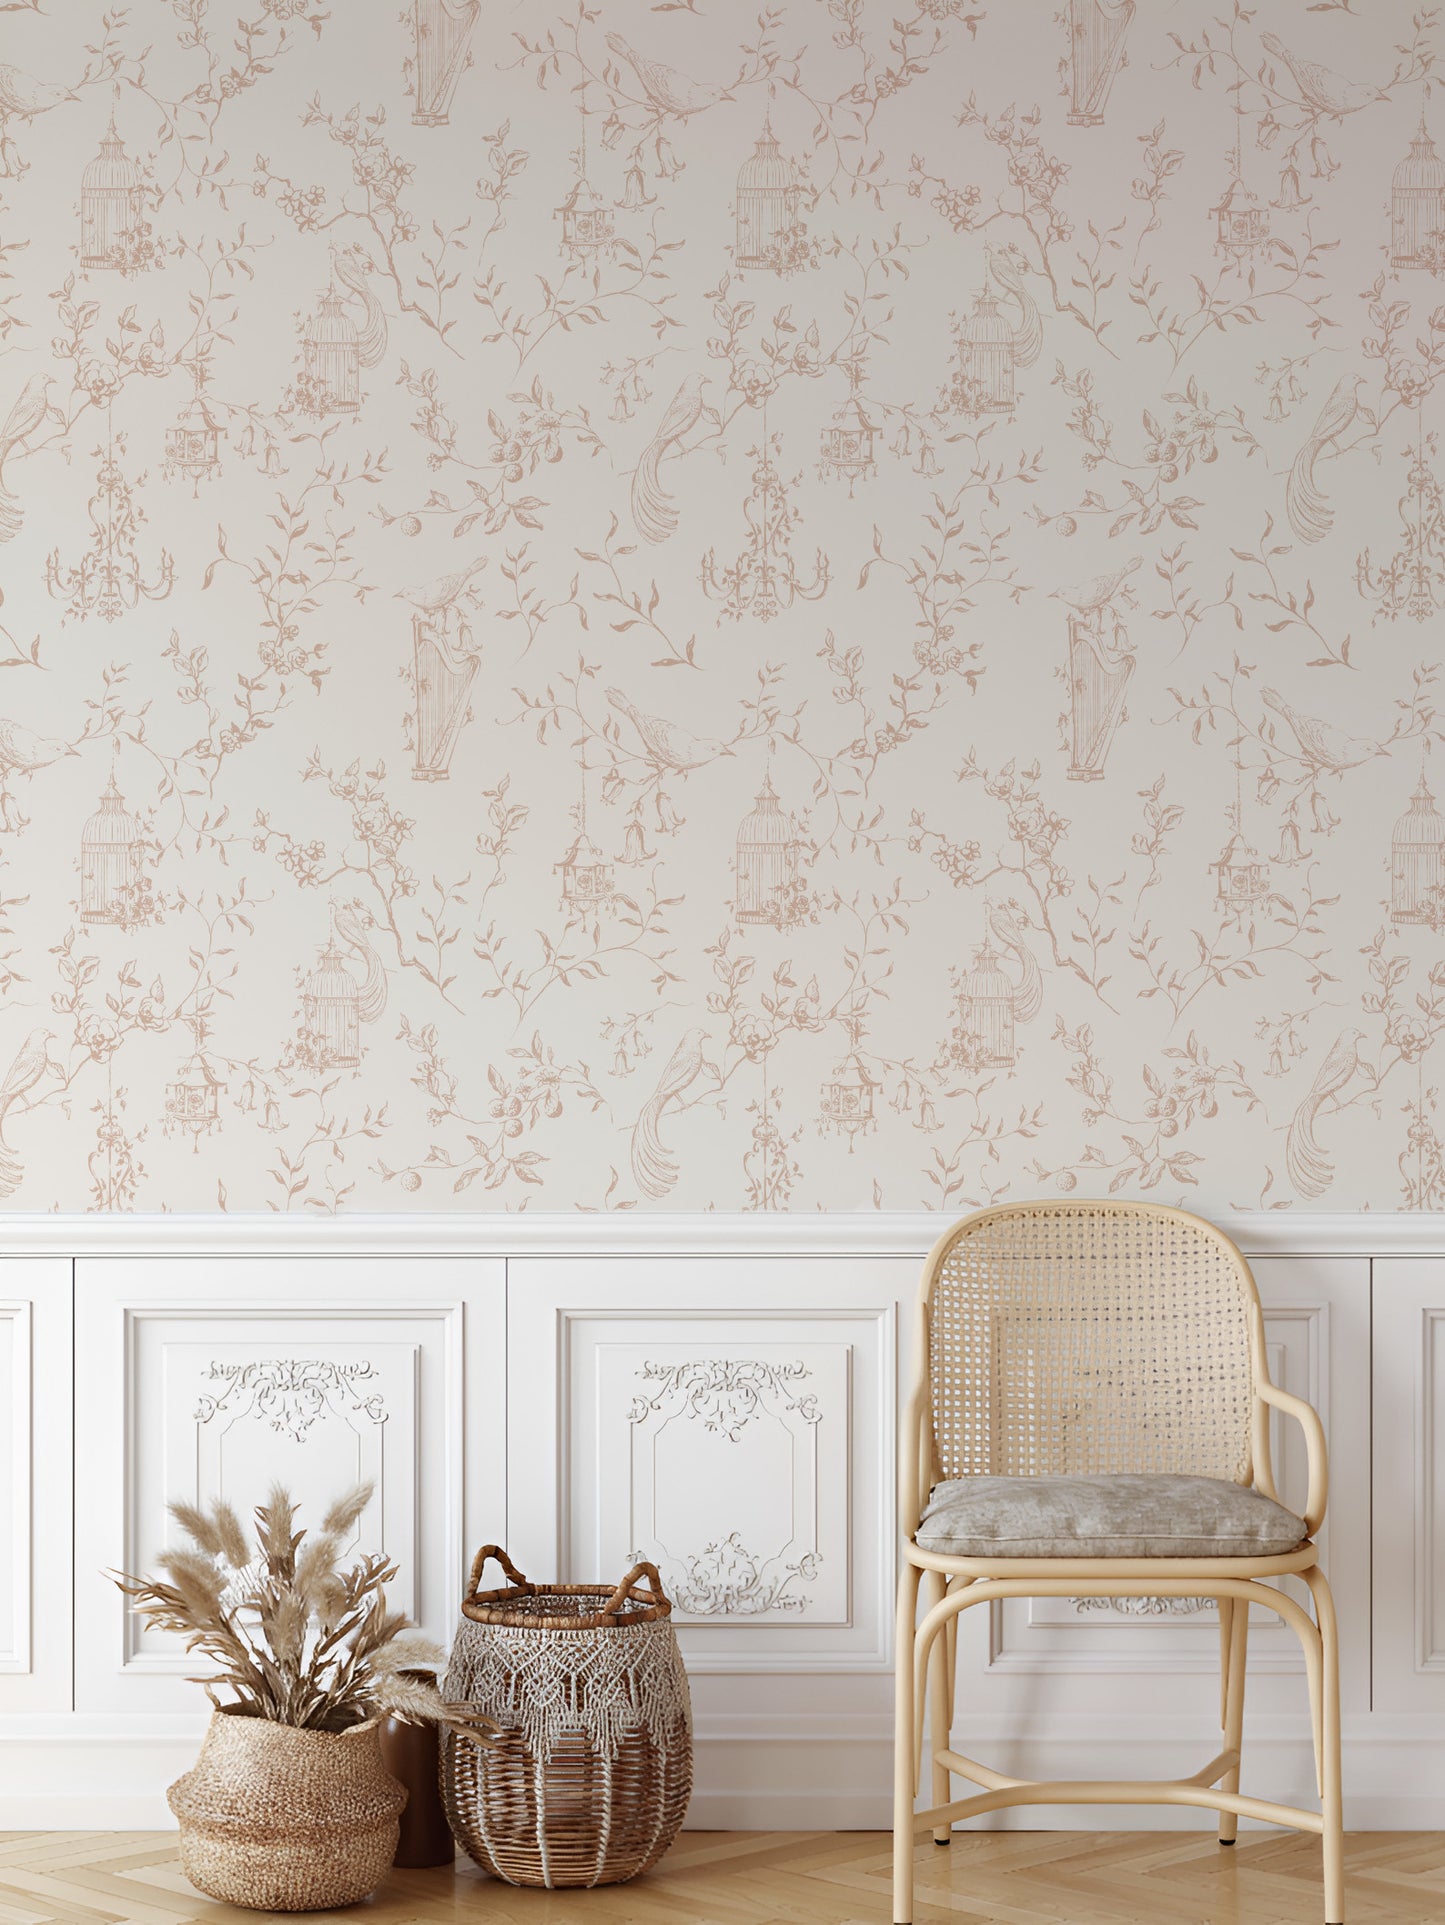  Beige toile exquisite vintage beige toile peel and stick wallpaper designed in French country style in US